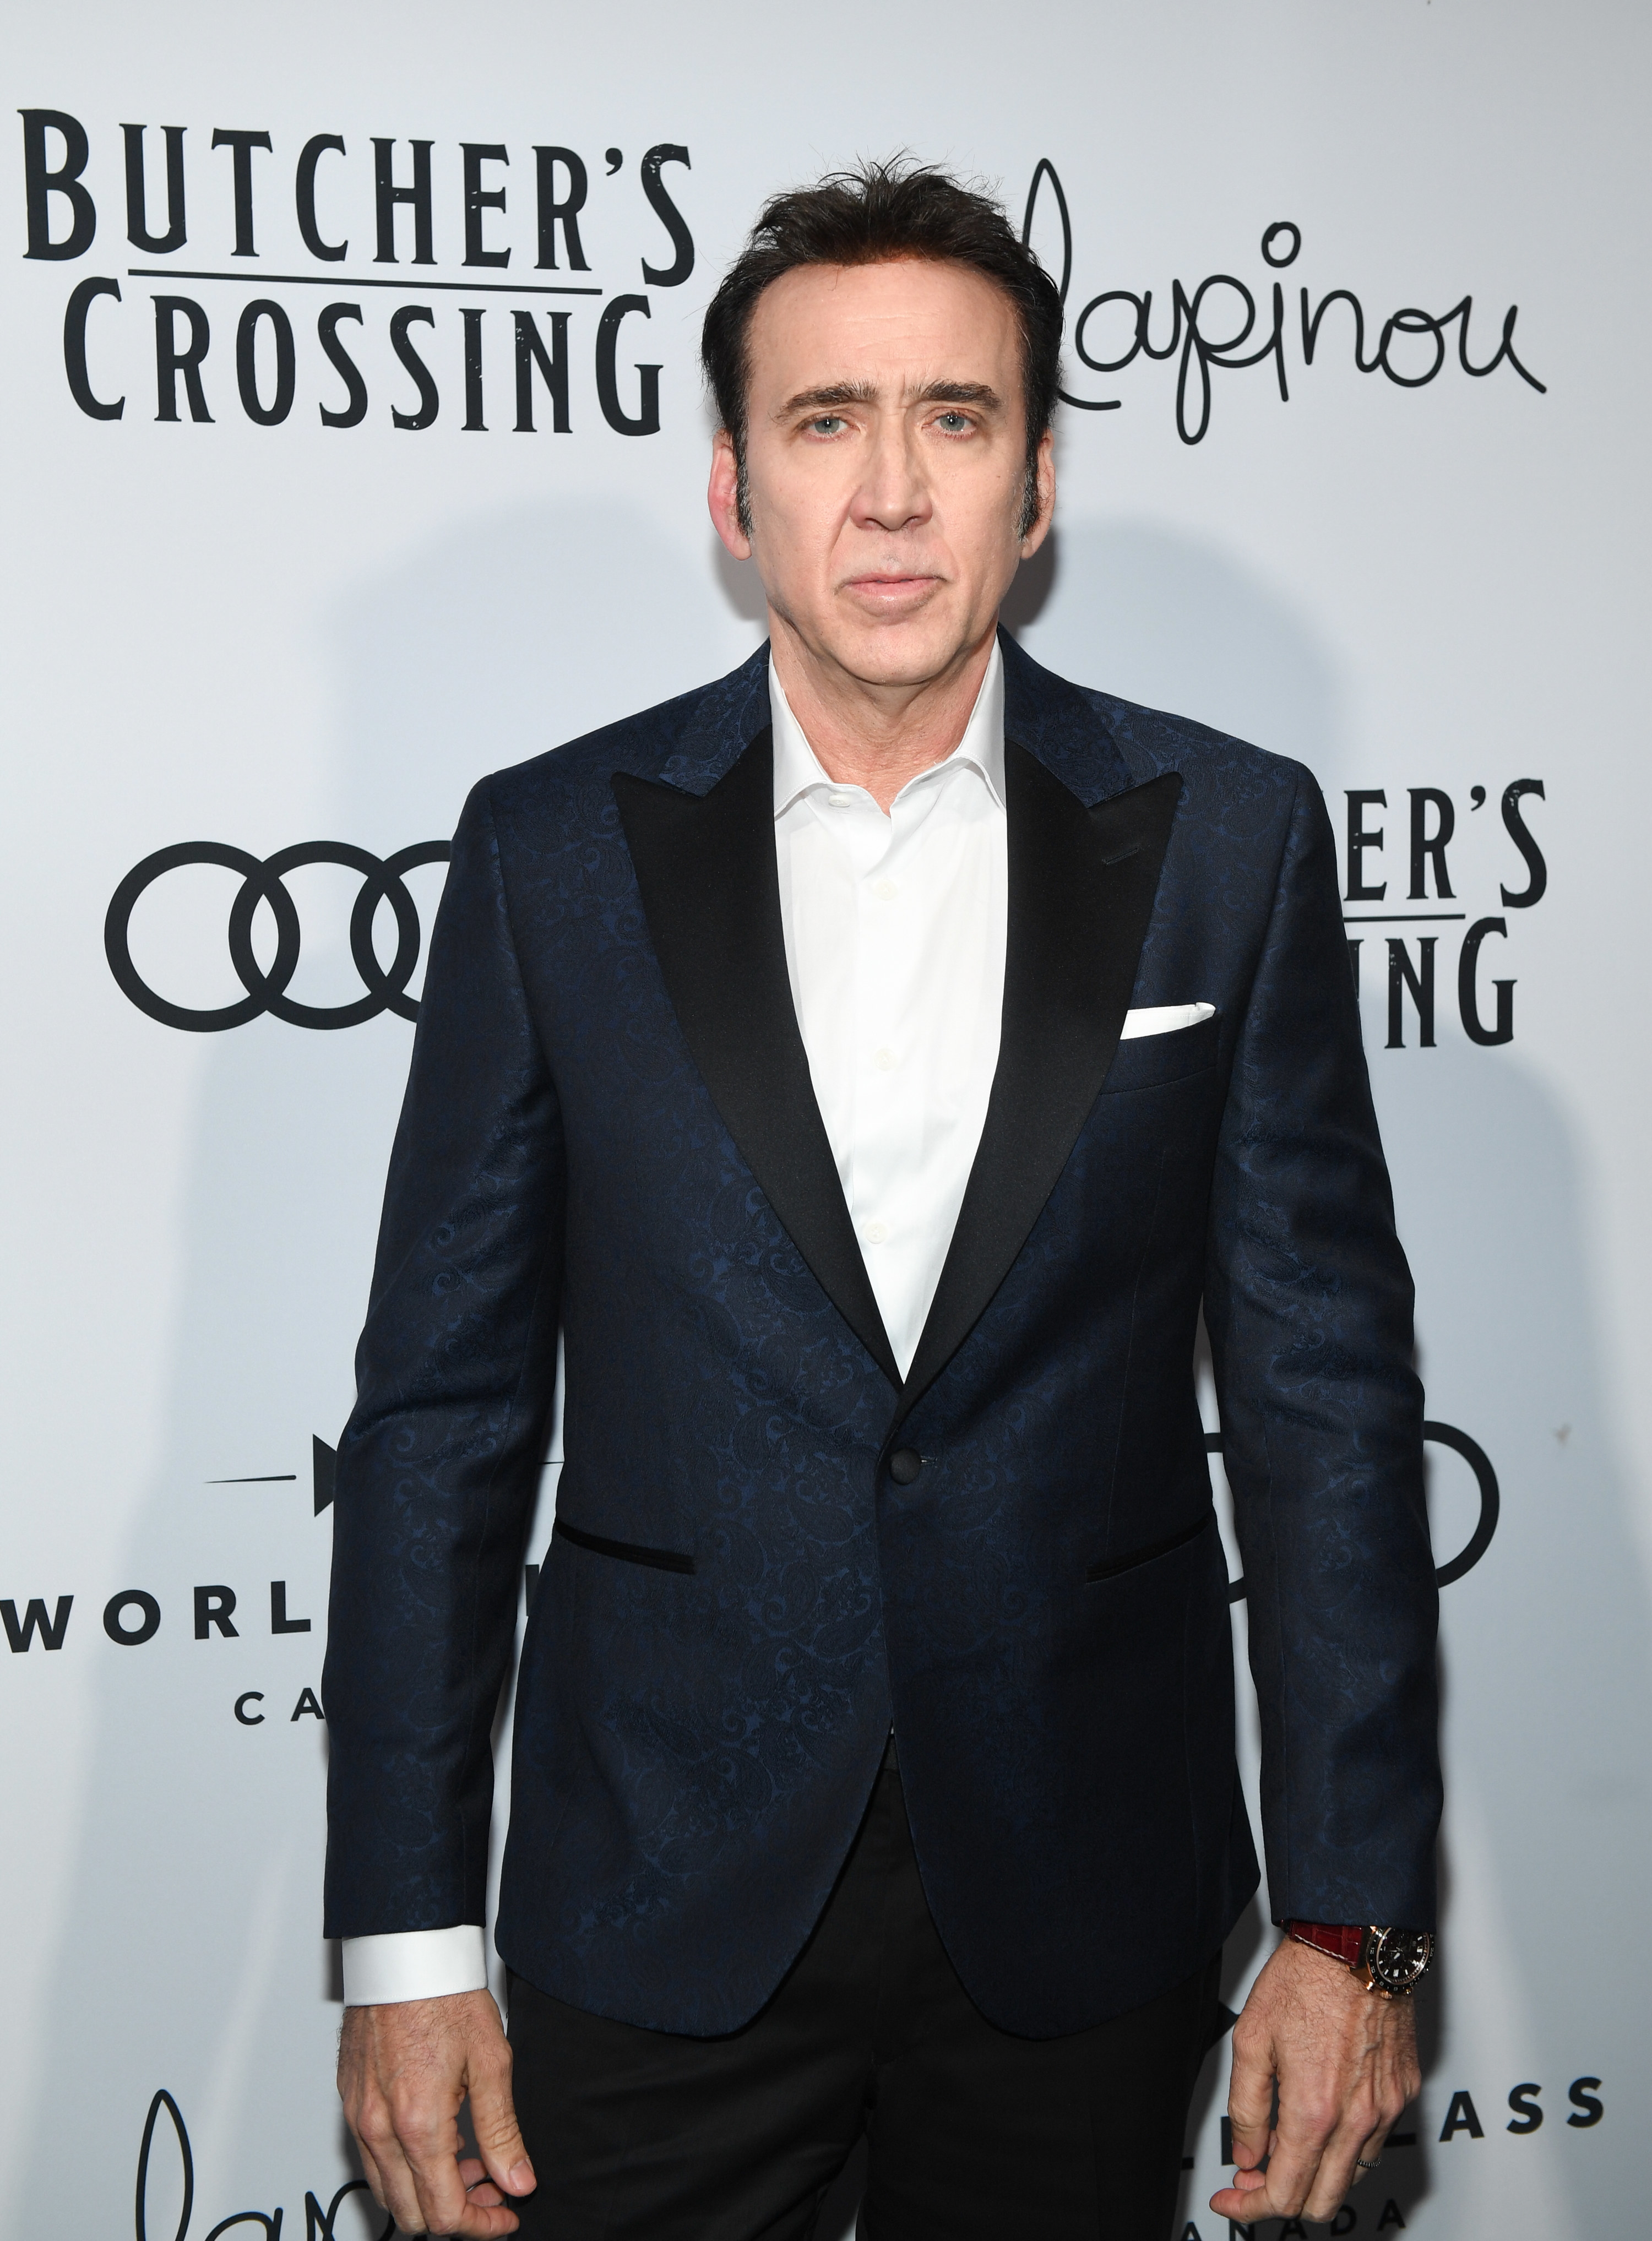 Cage looking serious at an event